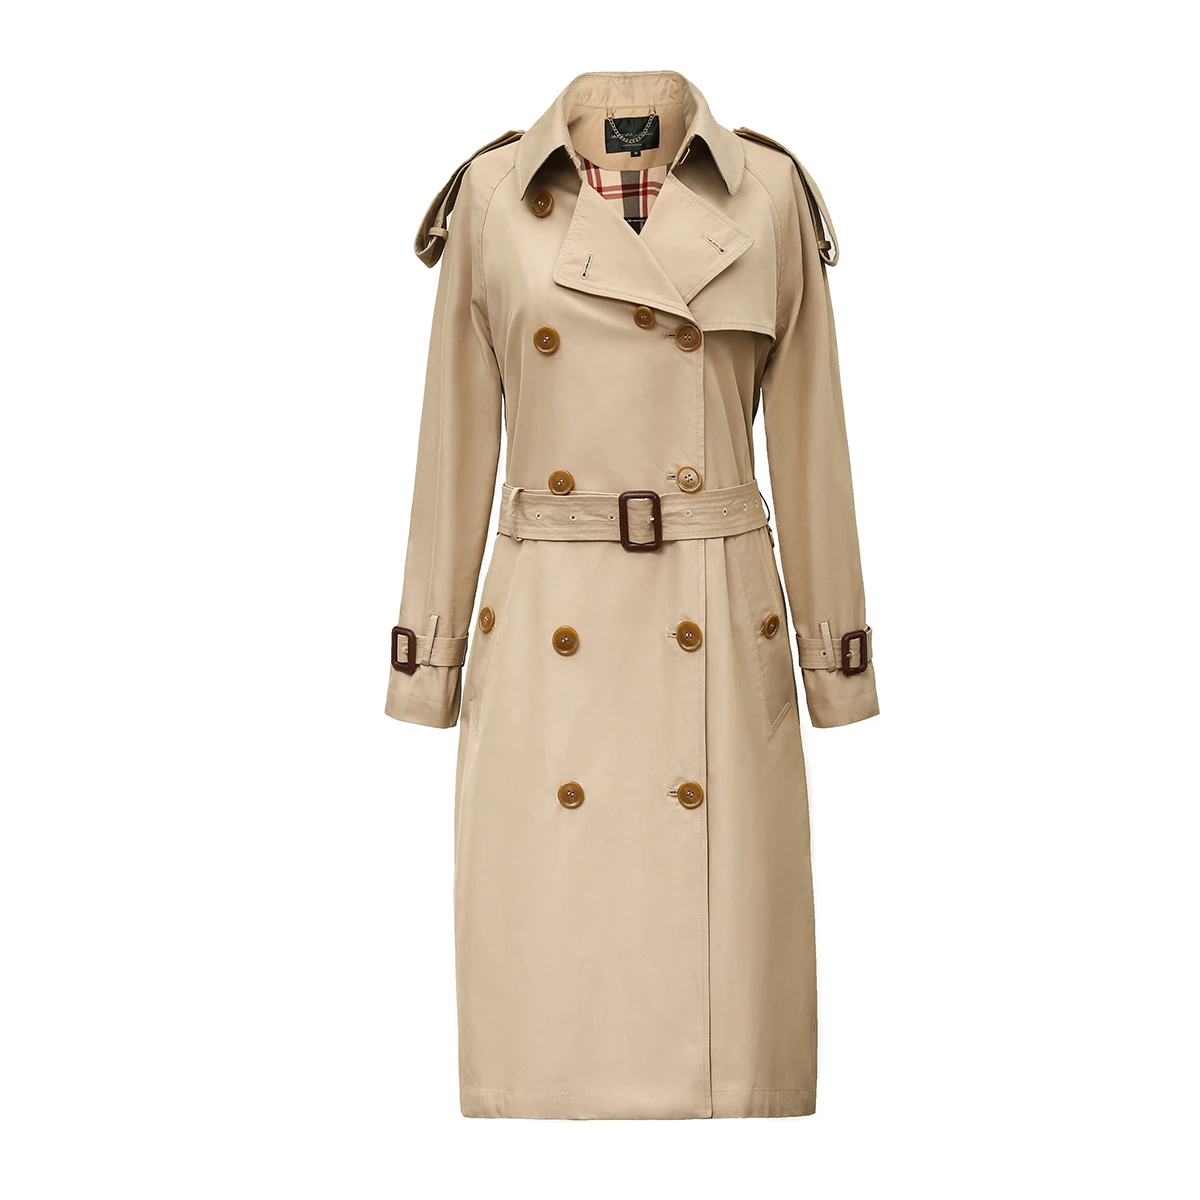 

New High Fashion Women's Waterproof Cotton Long Double-breasted The Westminster Heritage Trench Coat